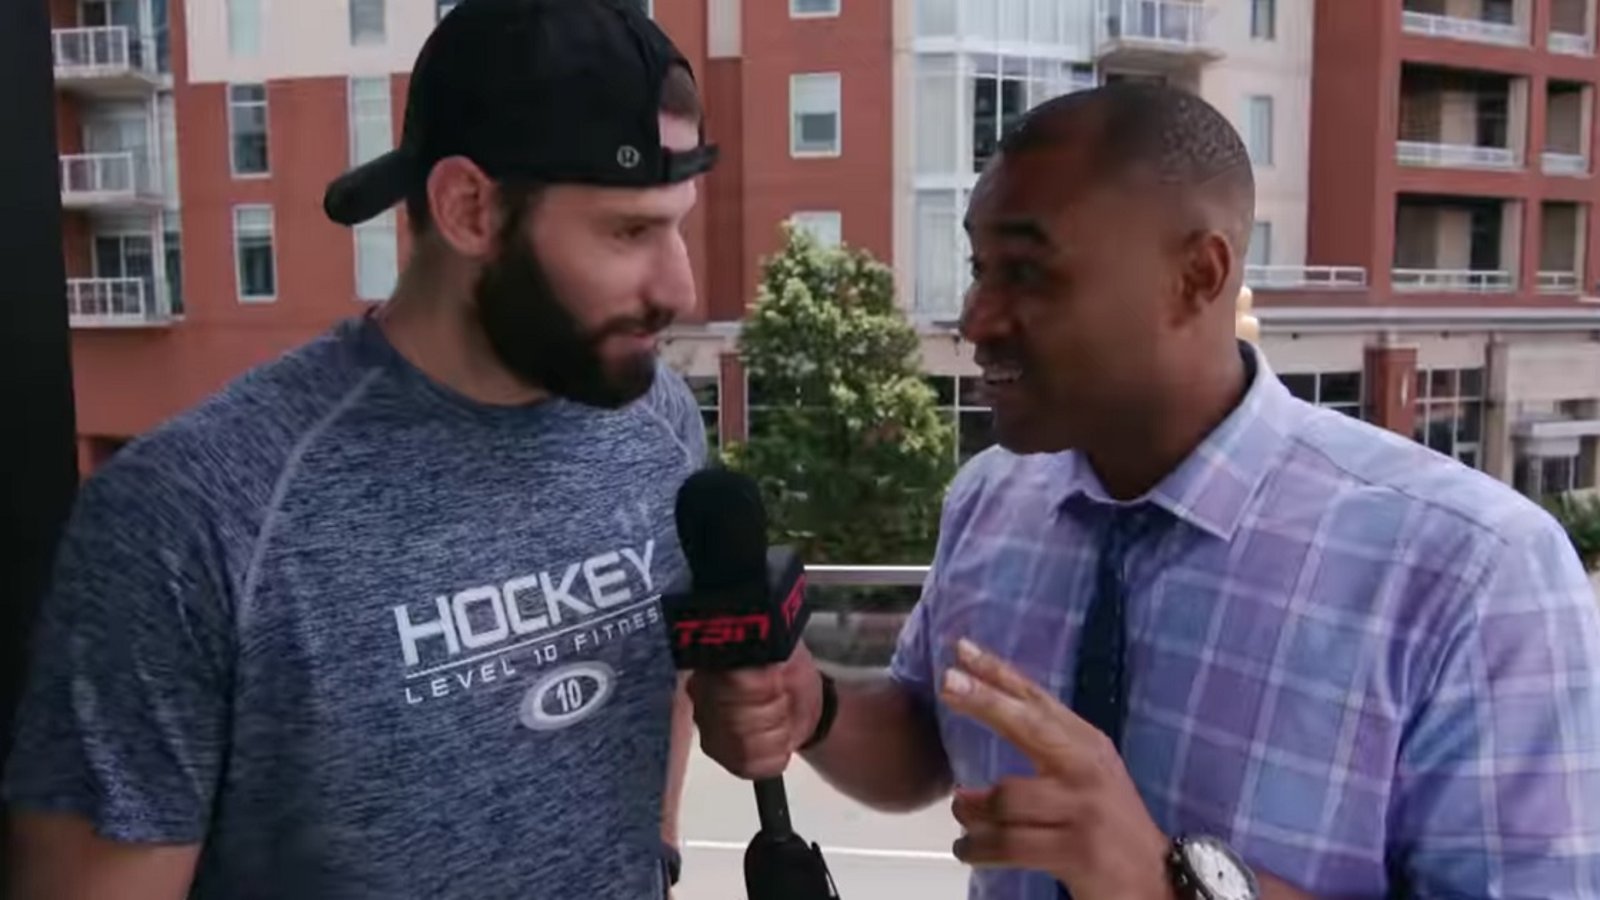 Ryan Kesler opens up about his “veteran moves” in the playoffs in hilarious interview.